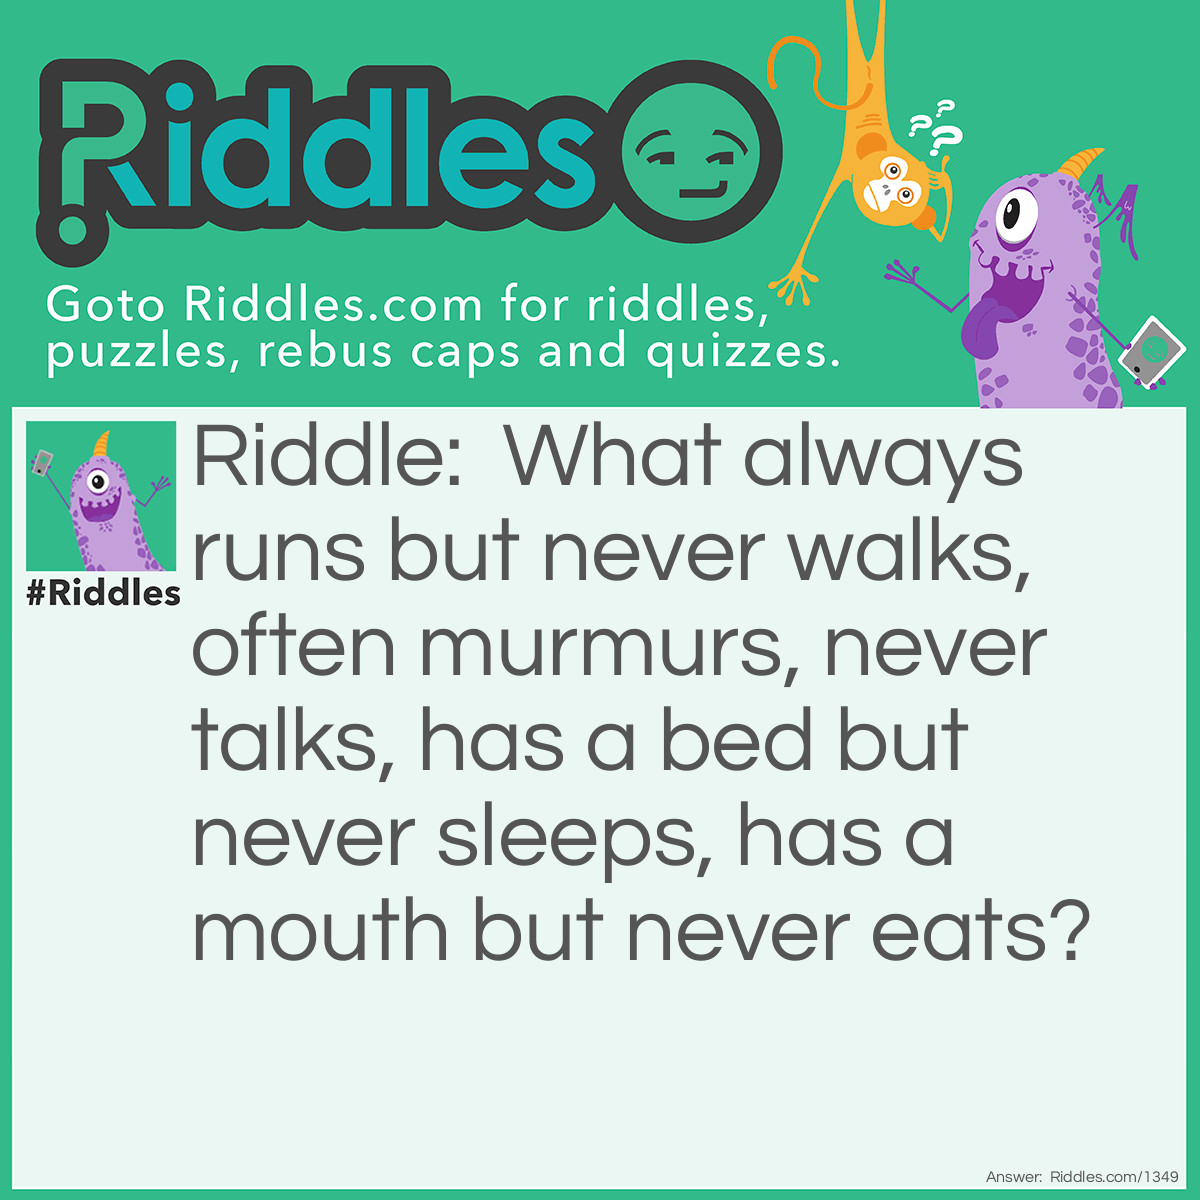 Riddle: What can run, but never walks; has a mouth, but never talks; has a head, but never weeps; has a bed, but never sleeps? Answer: A river.